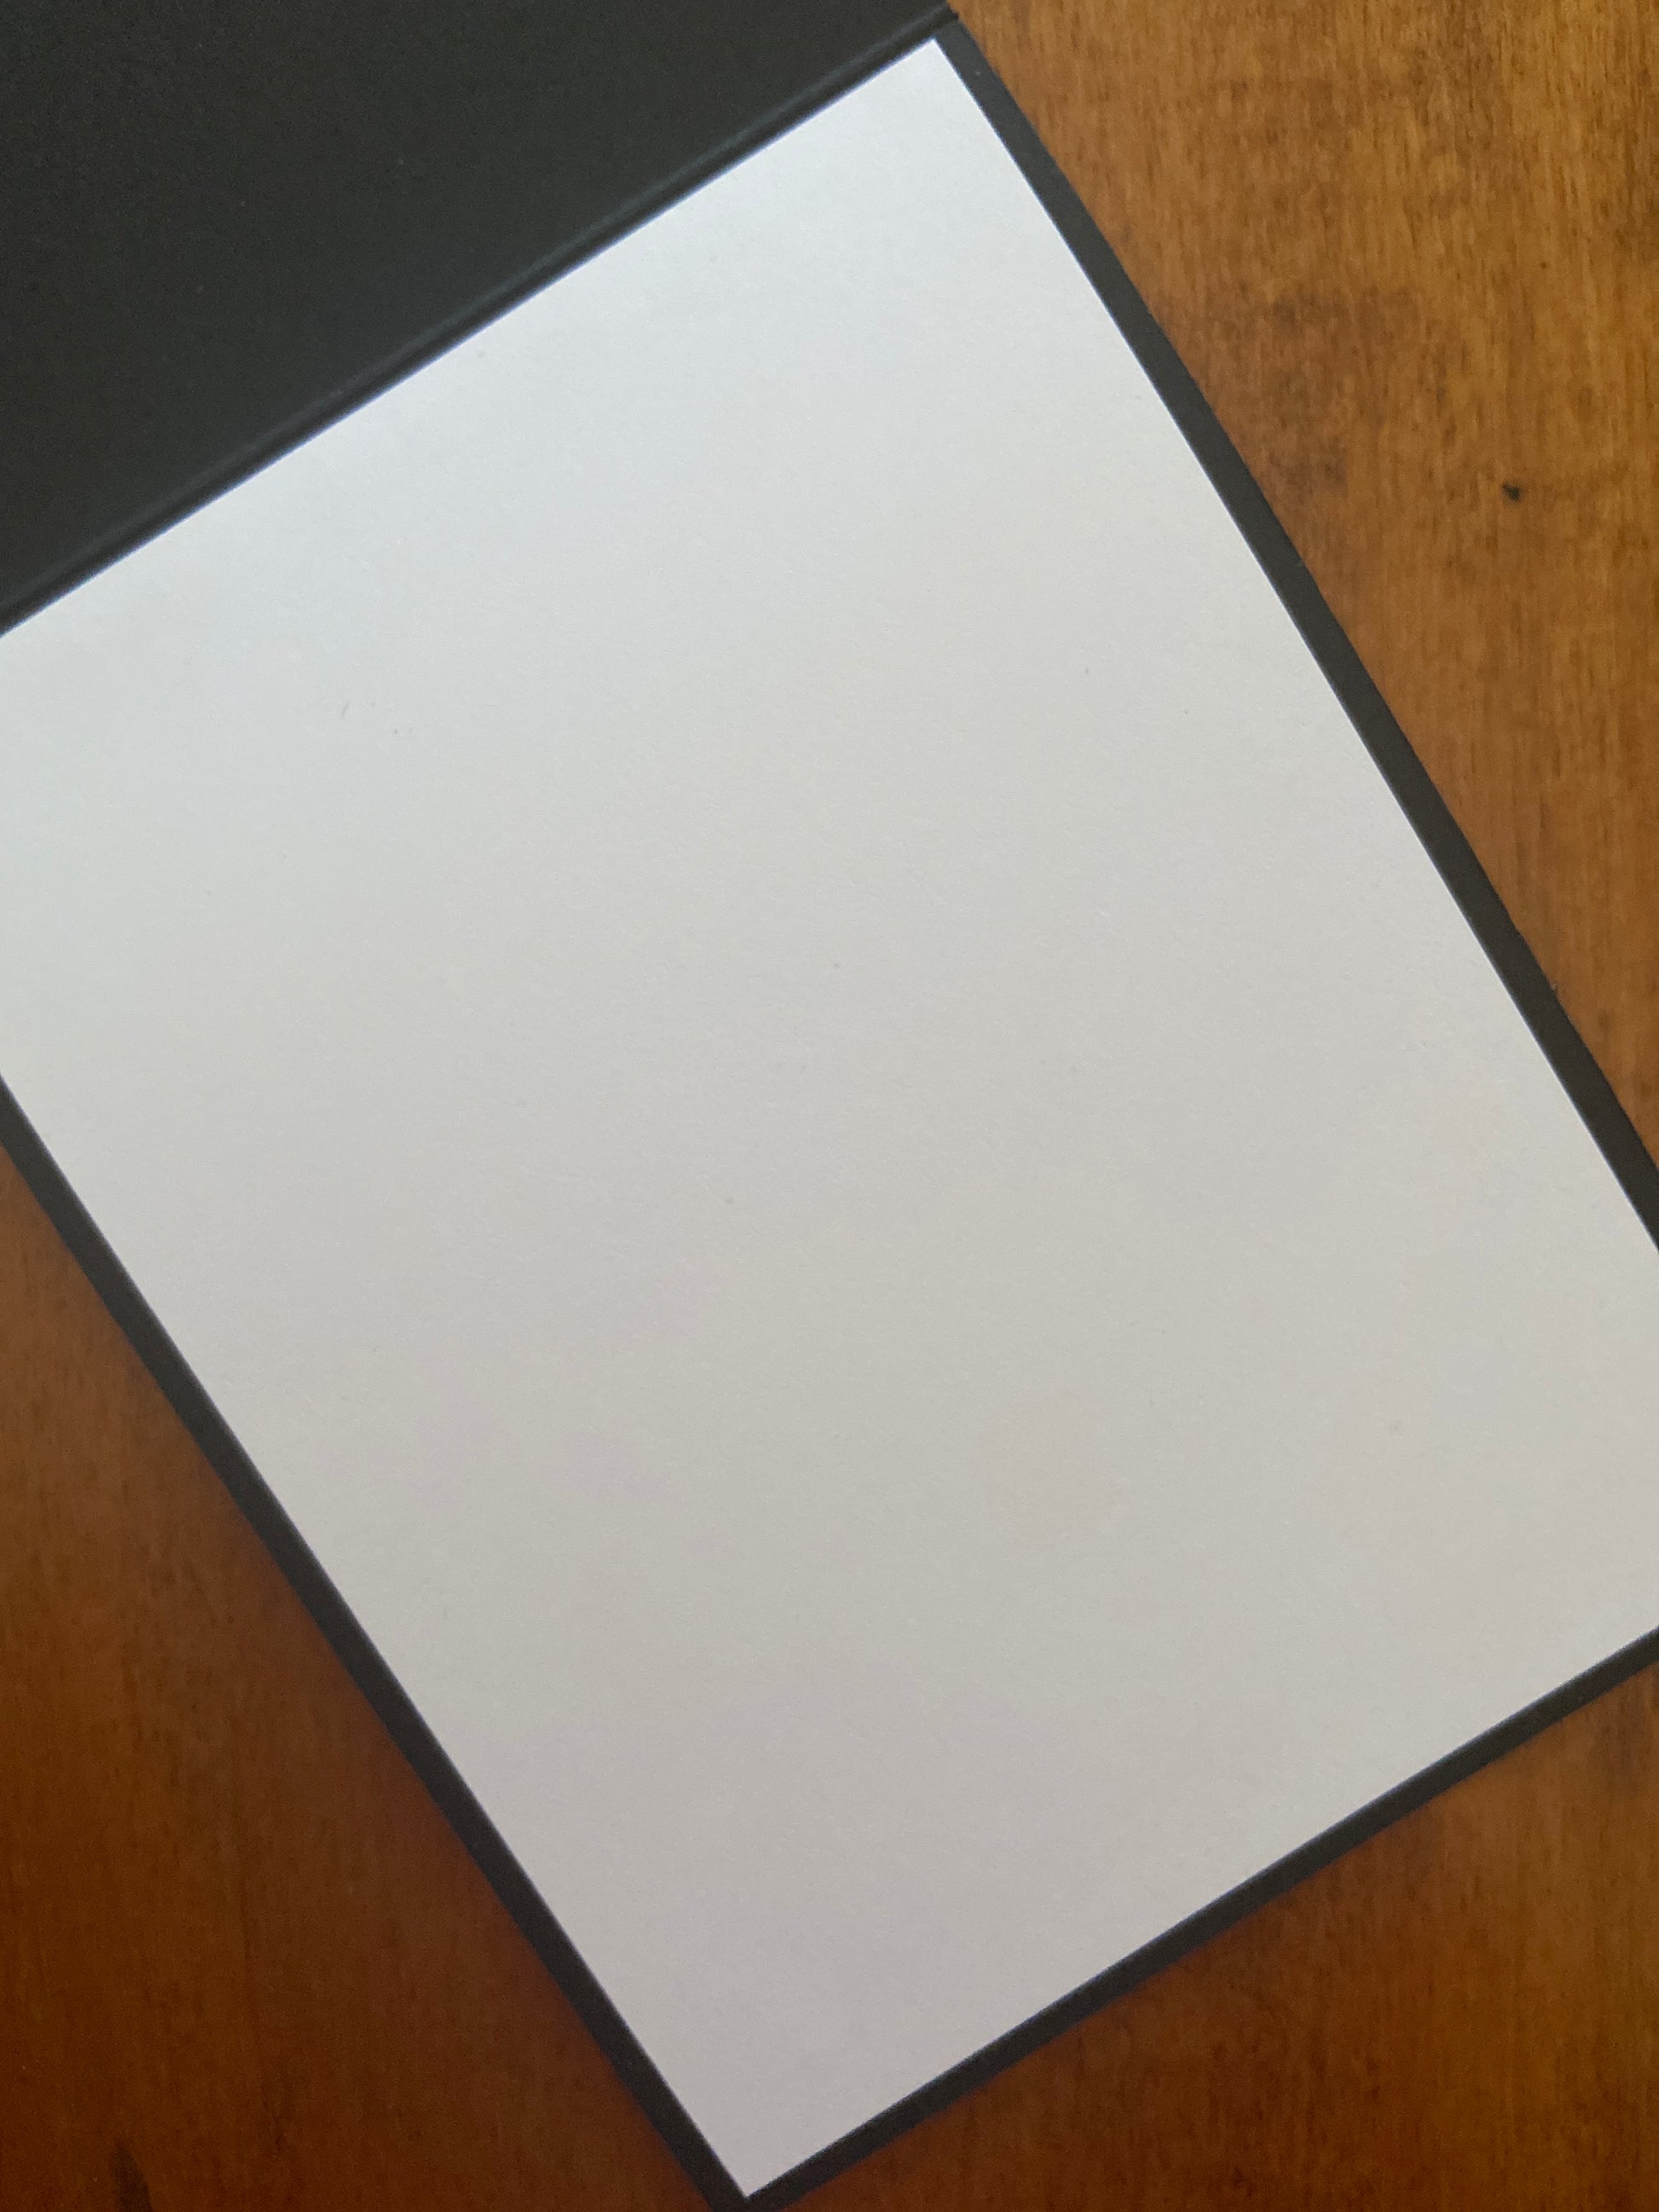 White panel on the inside of the card for your message since the notecard base is black card stock.